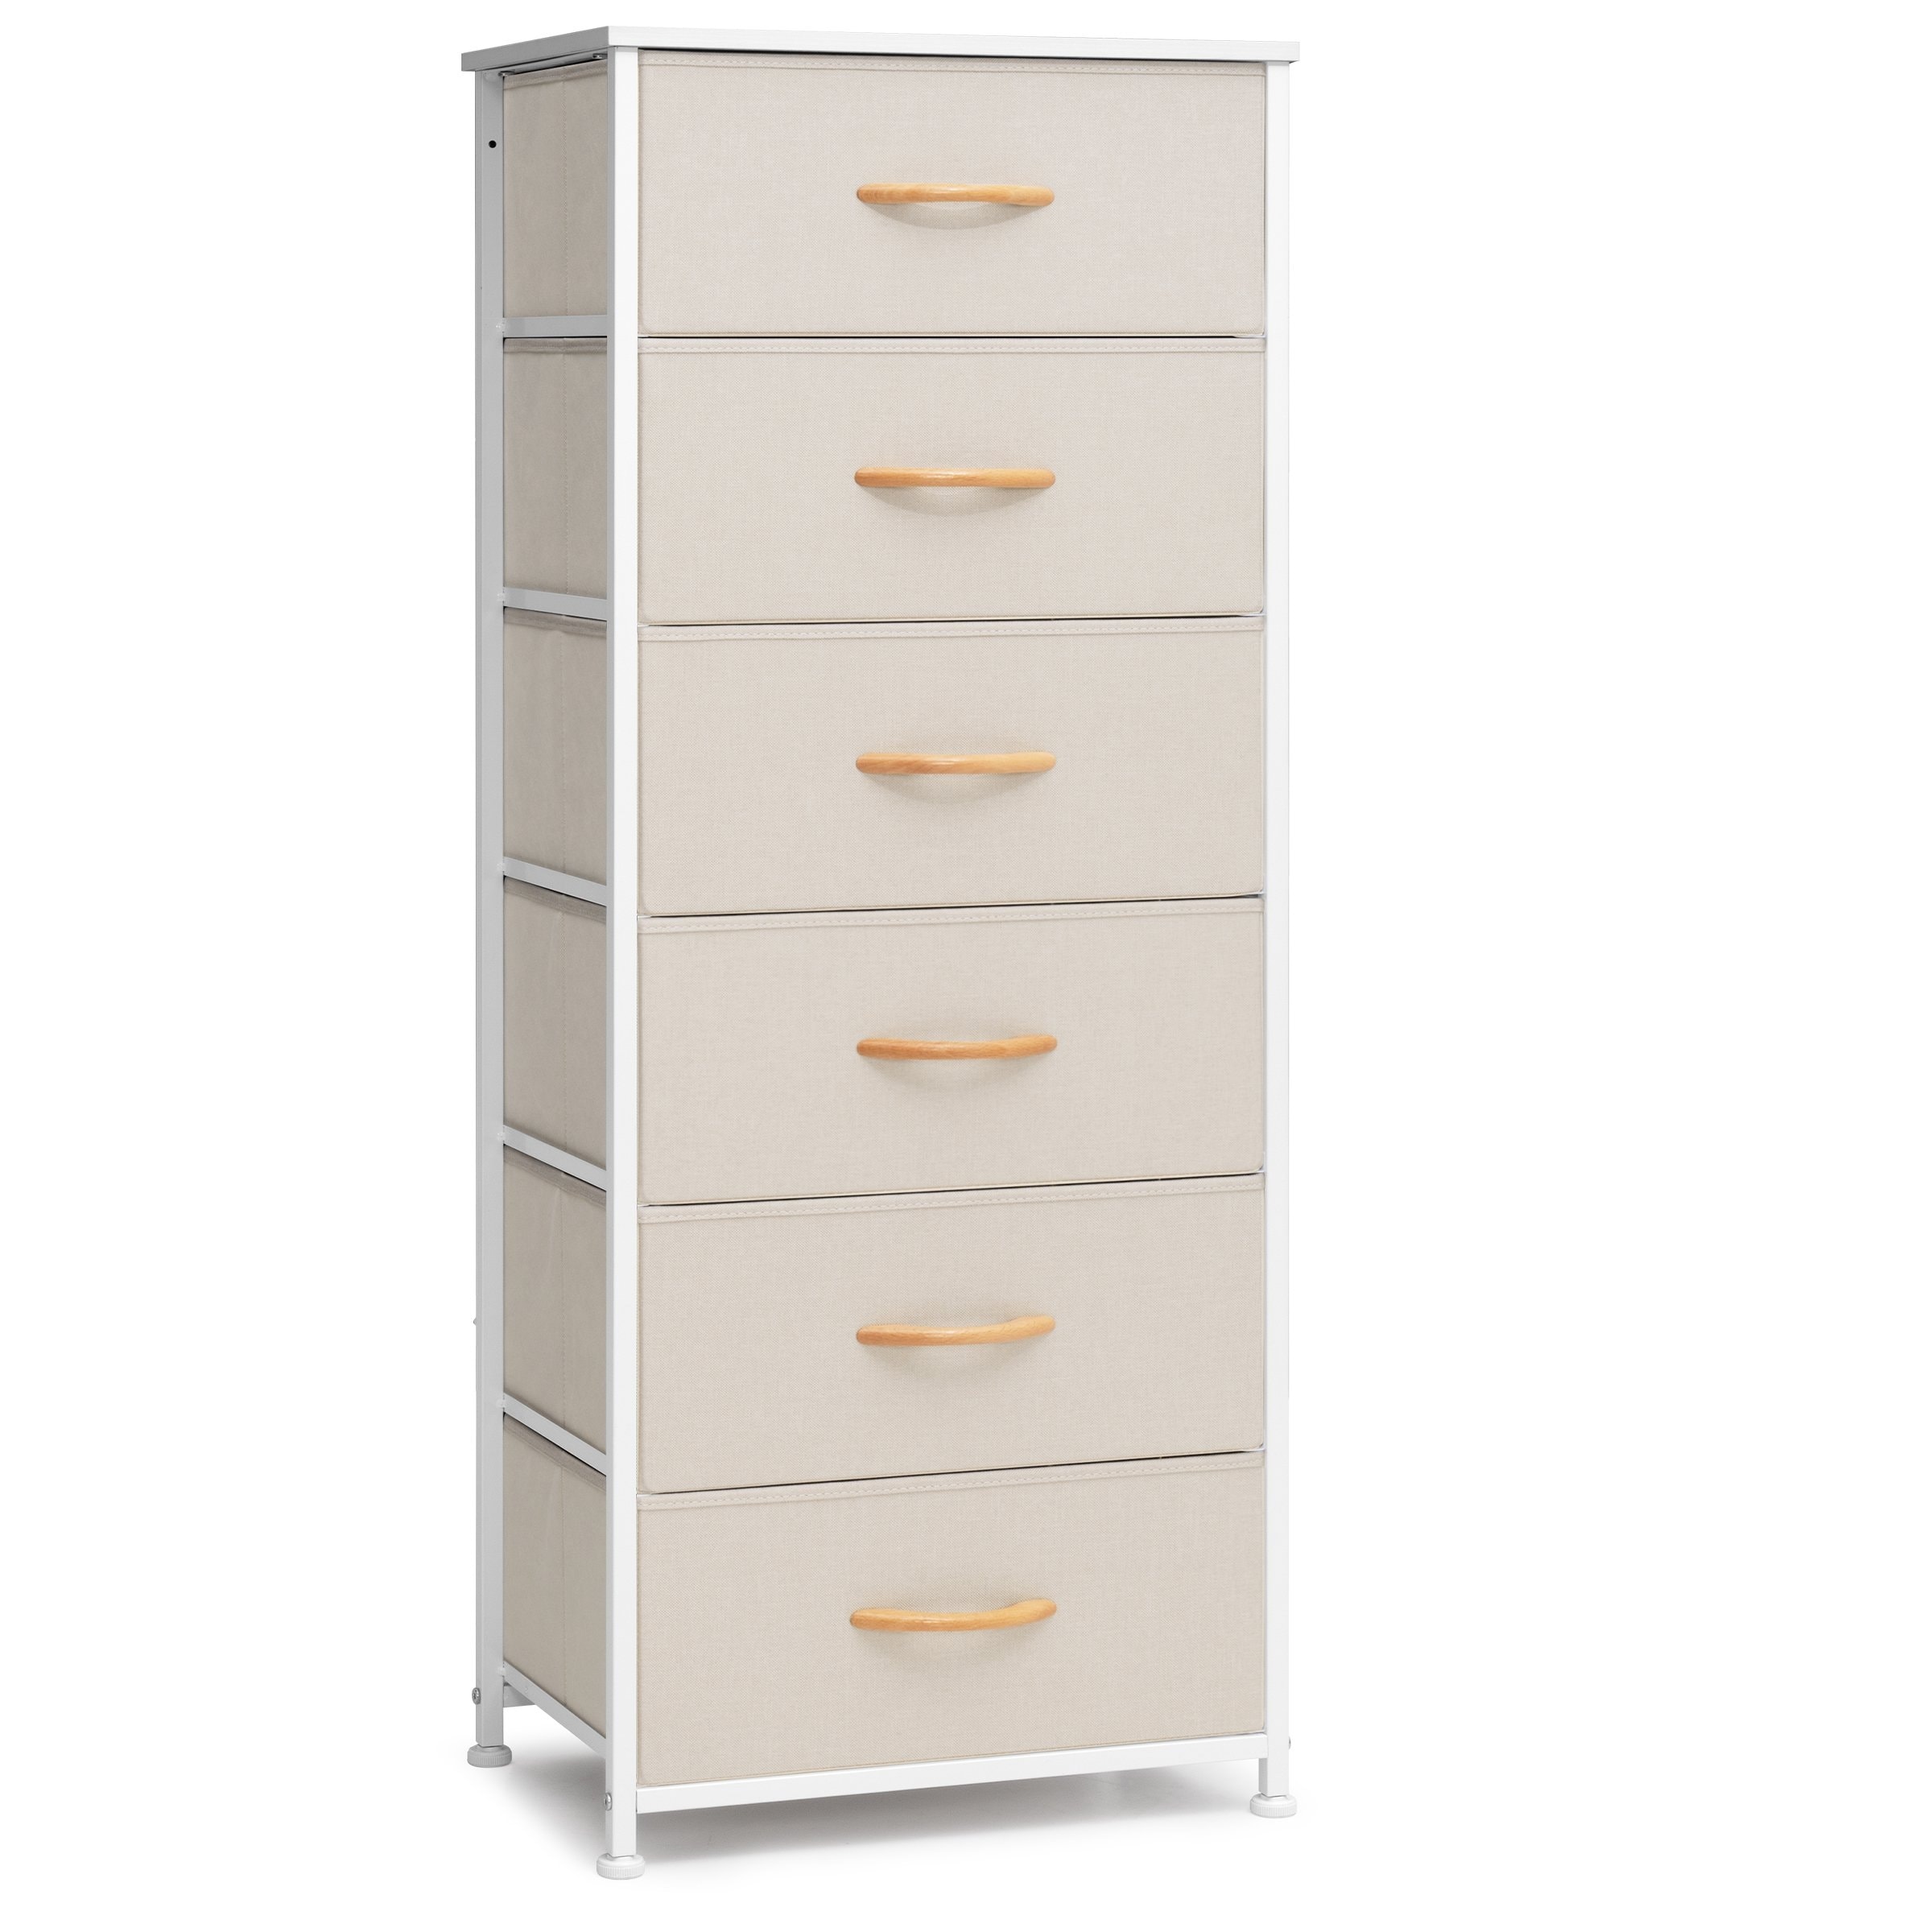 Crestlive Products Fabric Dresser for Bedroom, Storage Tower with 8 Drawers, Organizer Unit for Bedroom, Hallway, Nursery, Entry